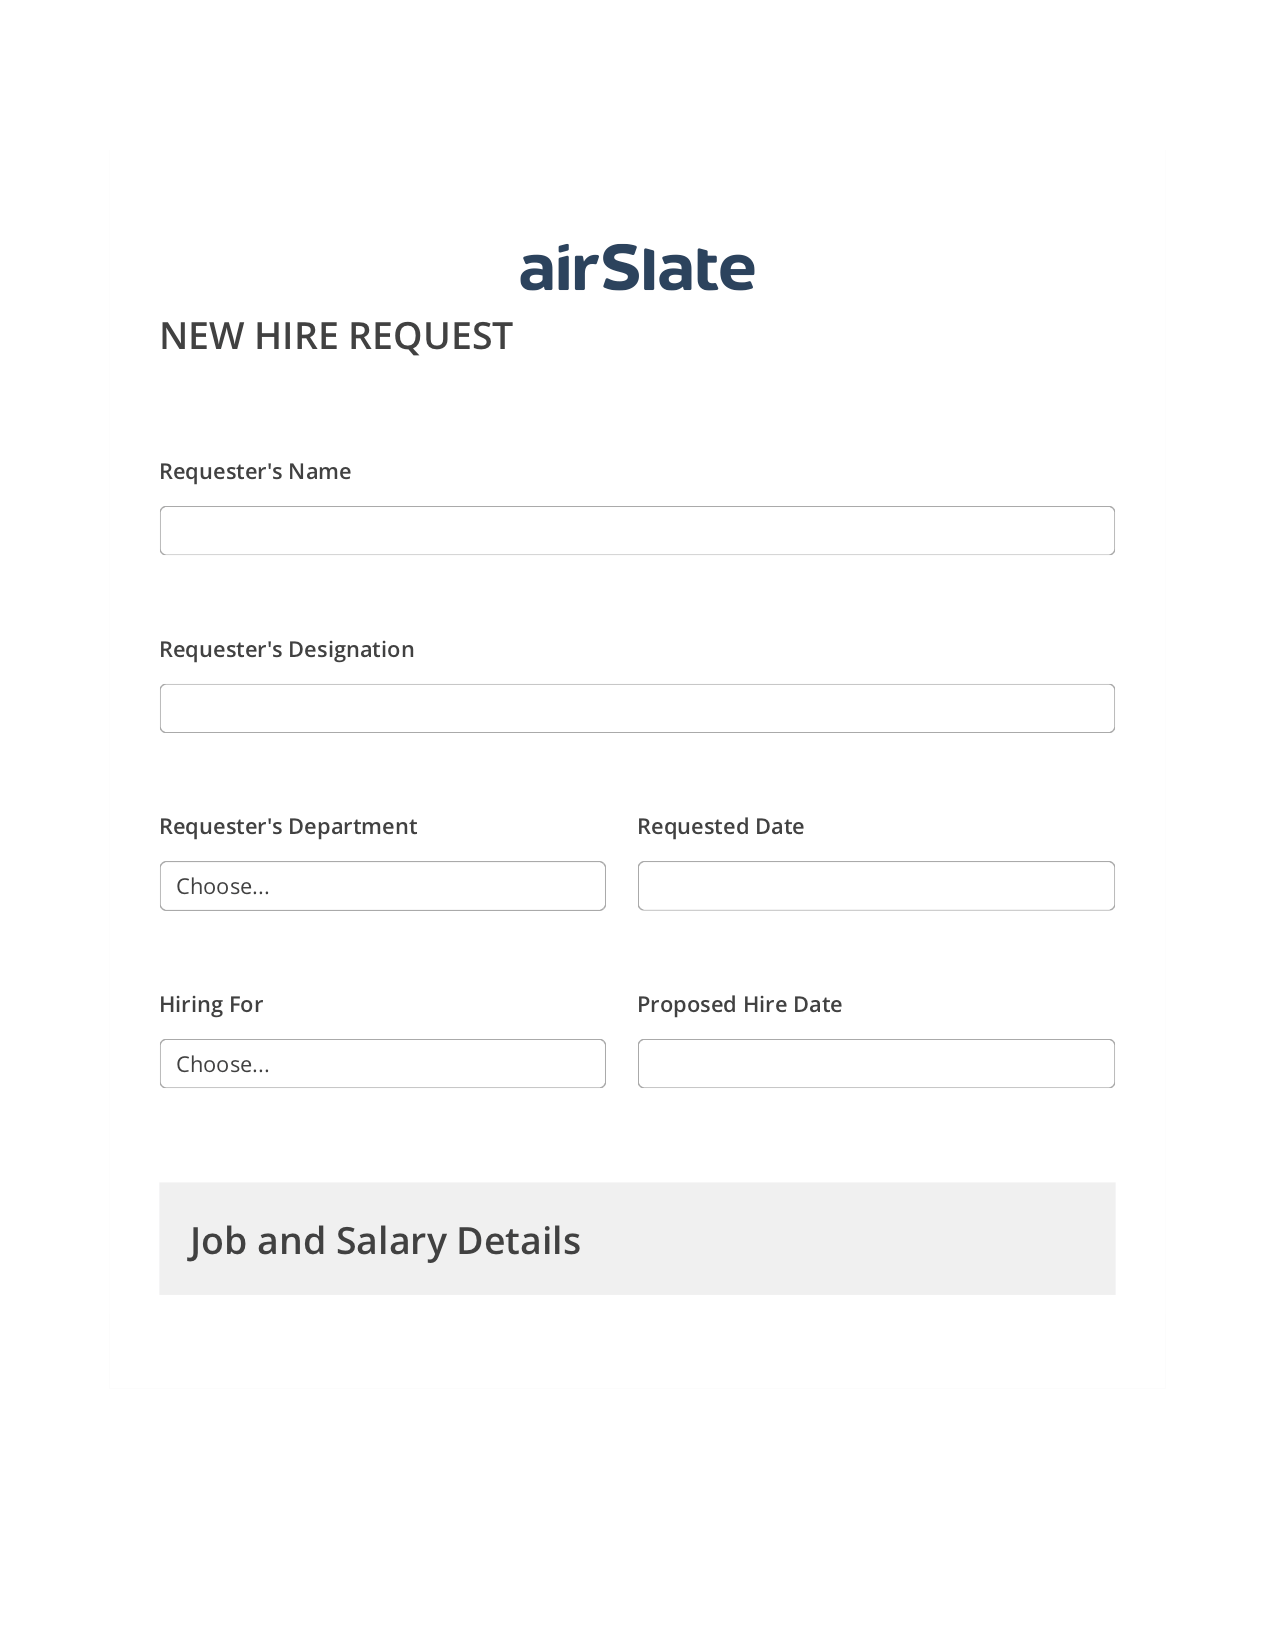 Hiring Request Workflow Prefill from NetSuite records, Google Sheet Two-Way Binding Bot, Export to MySQL Bot